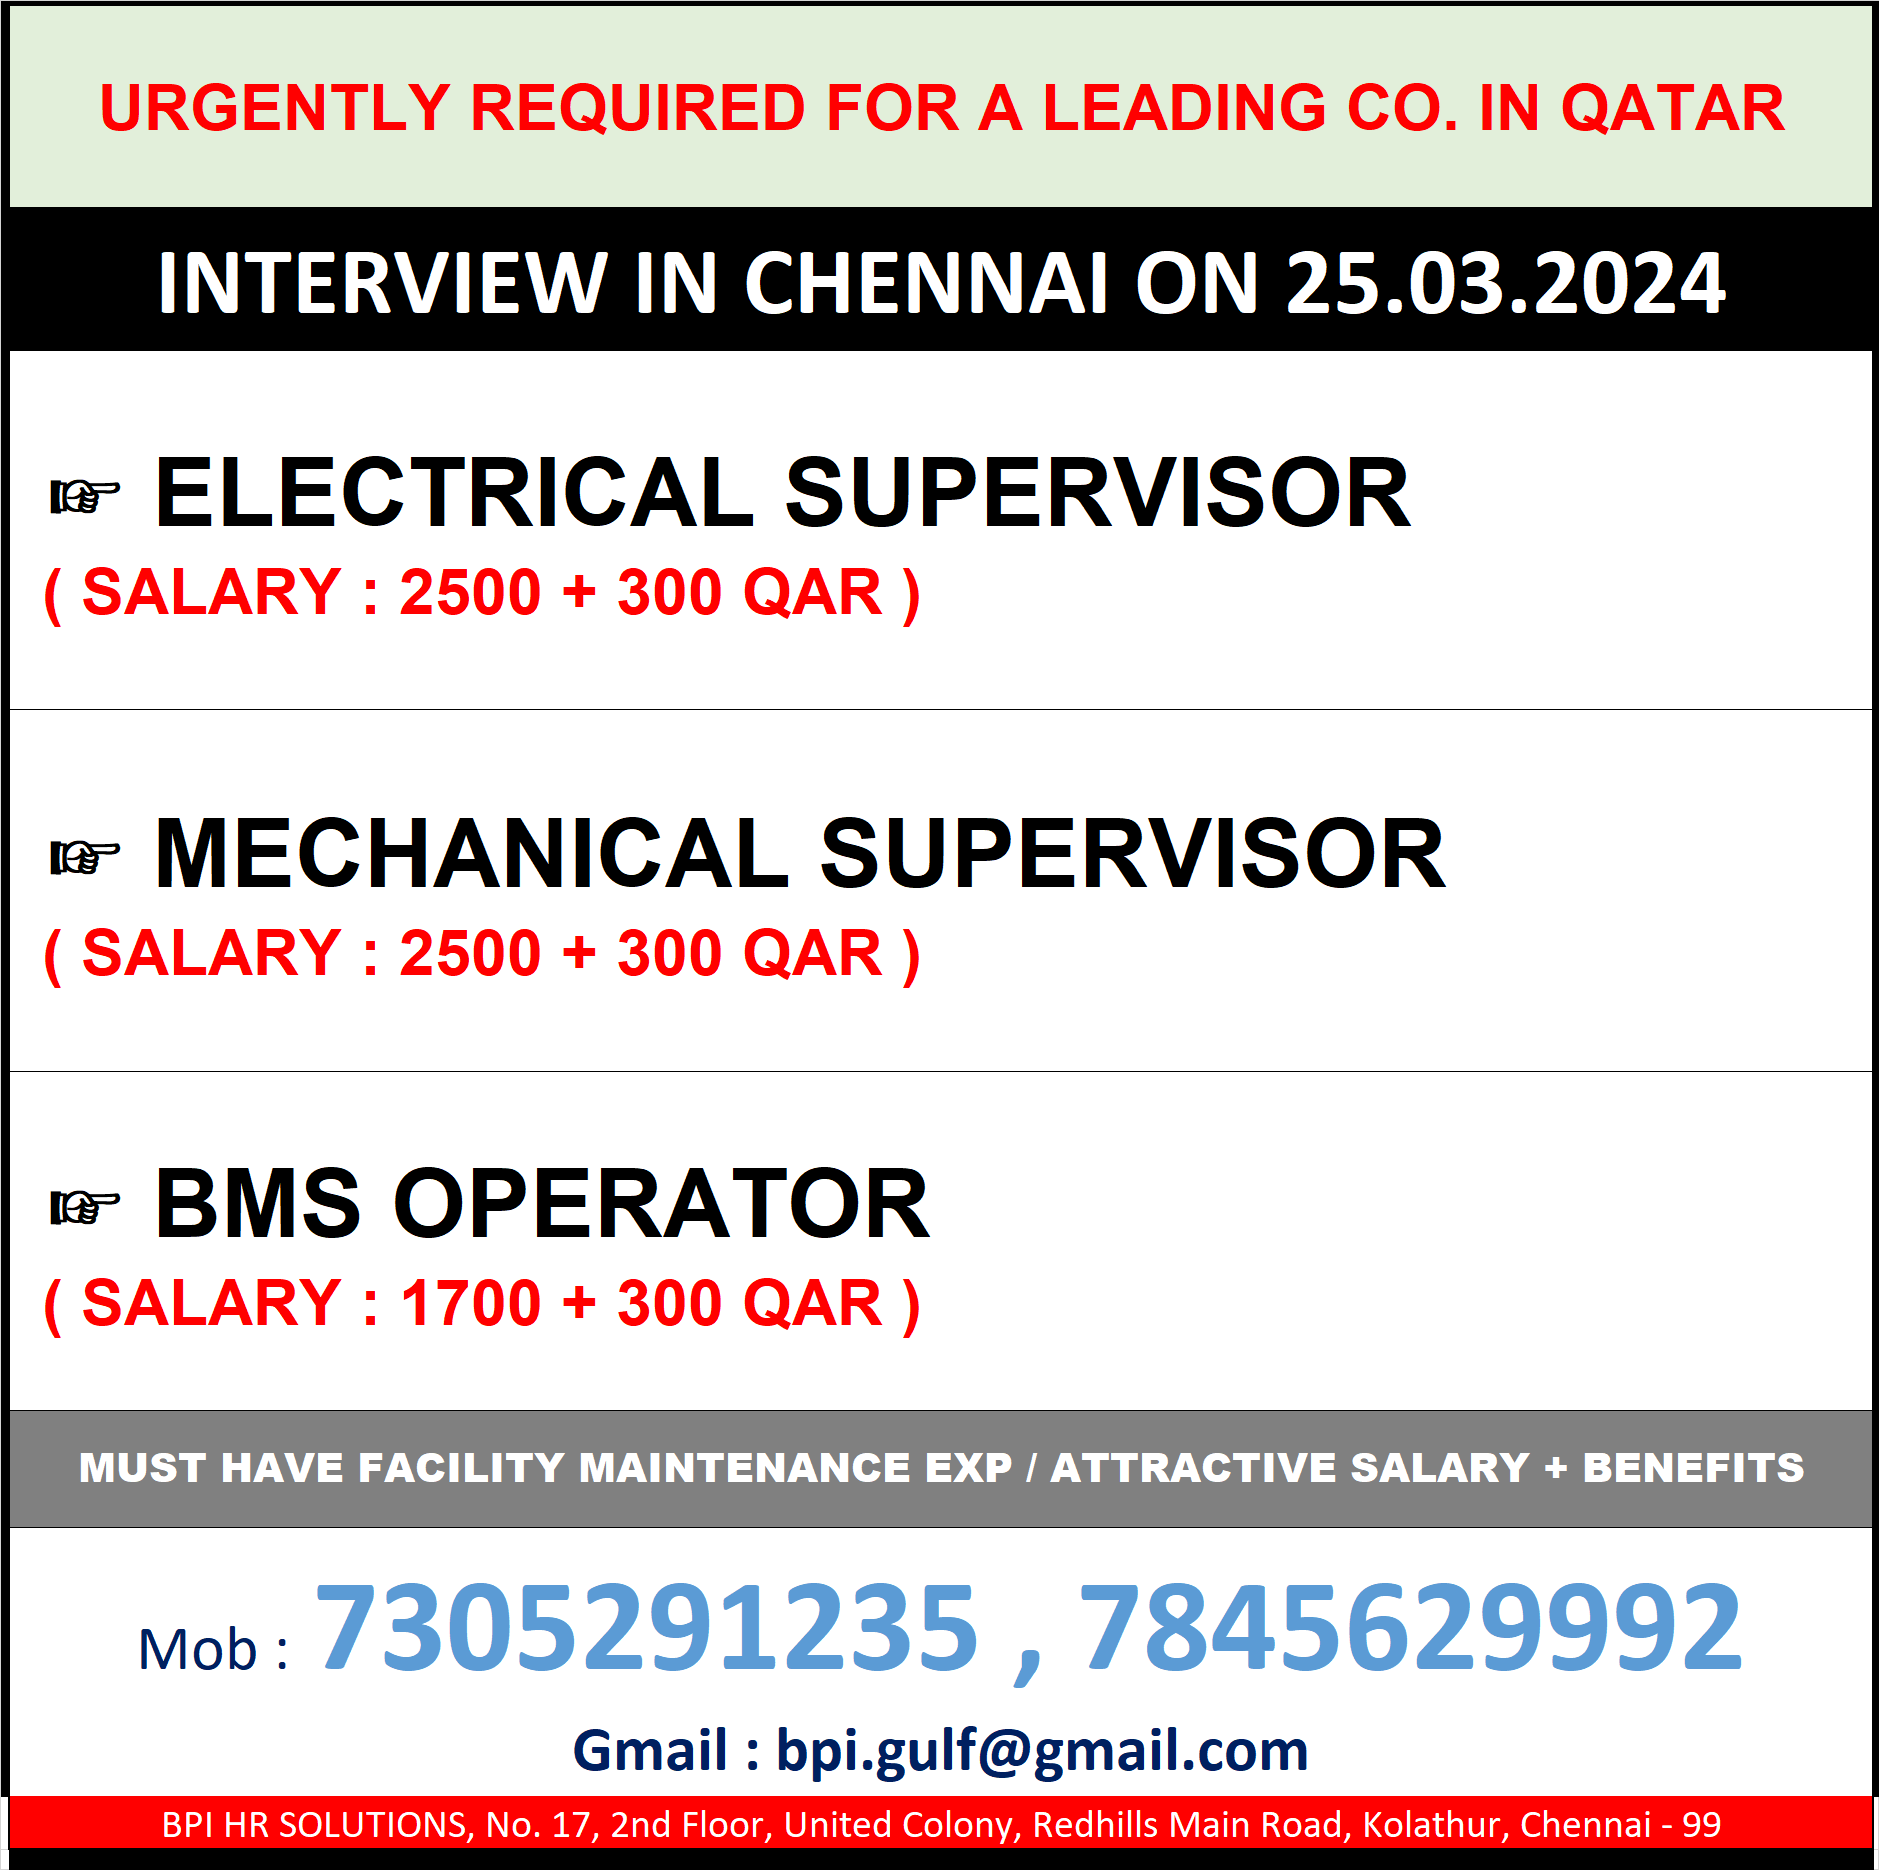 urgently required for a leading co. qatar